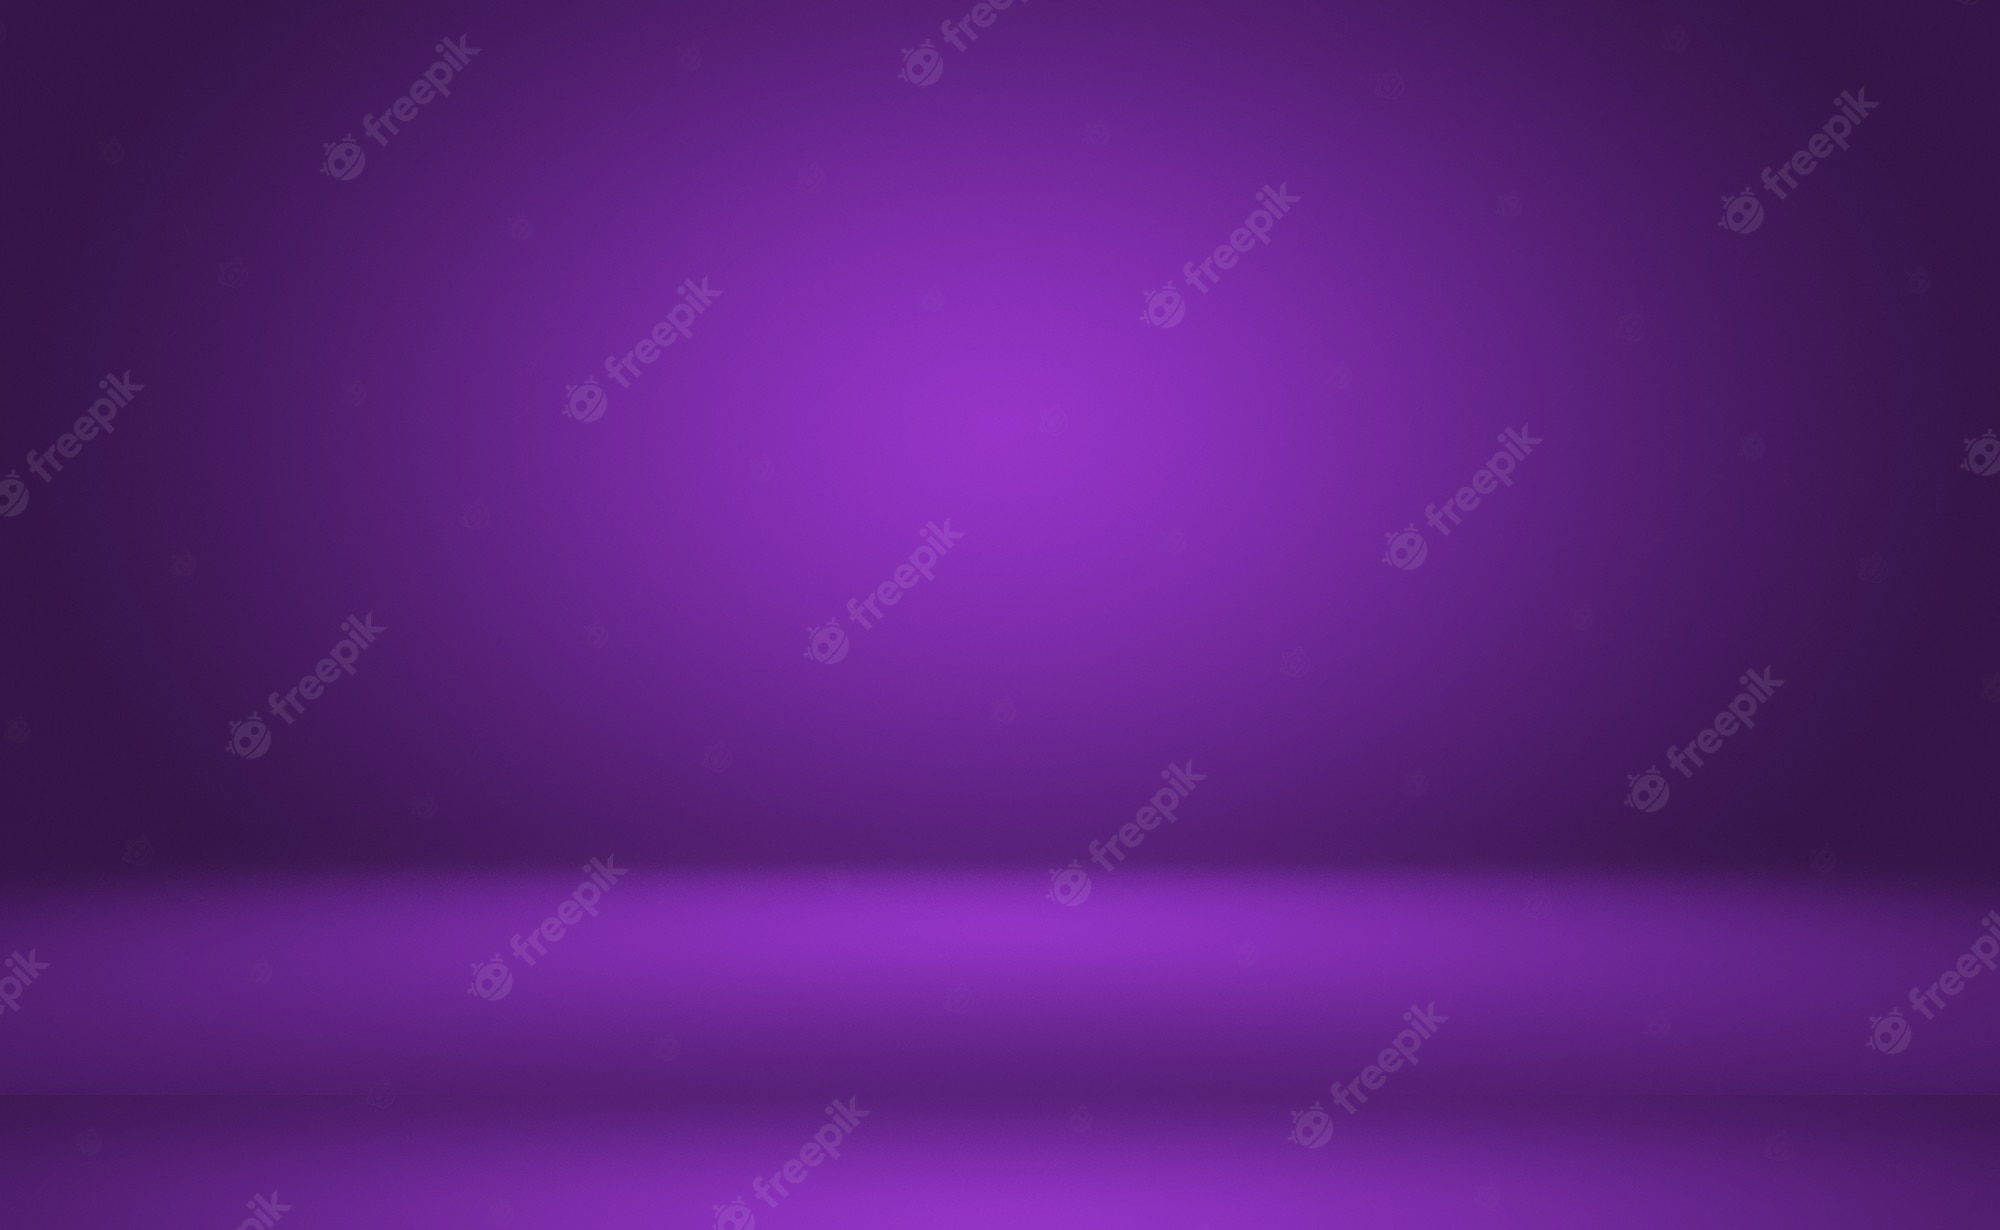 Neon Green And Purple Wallpapers